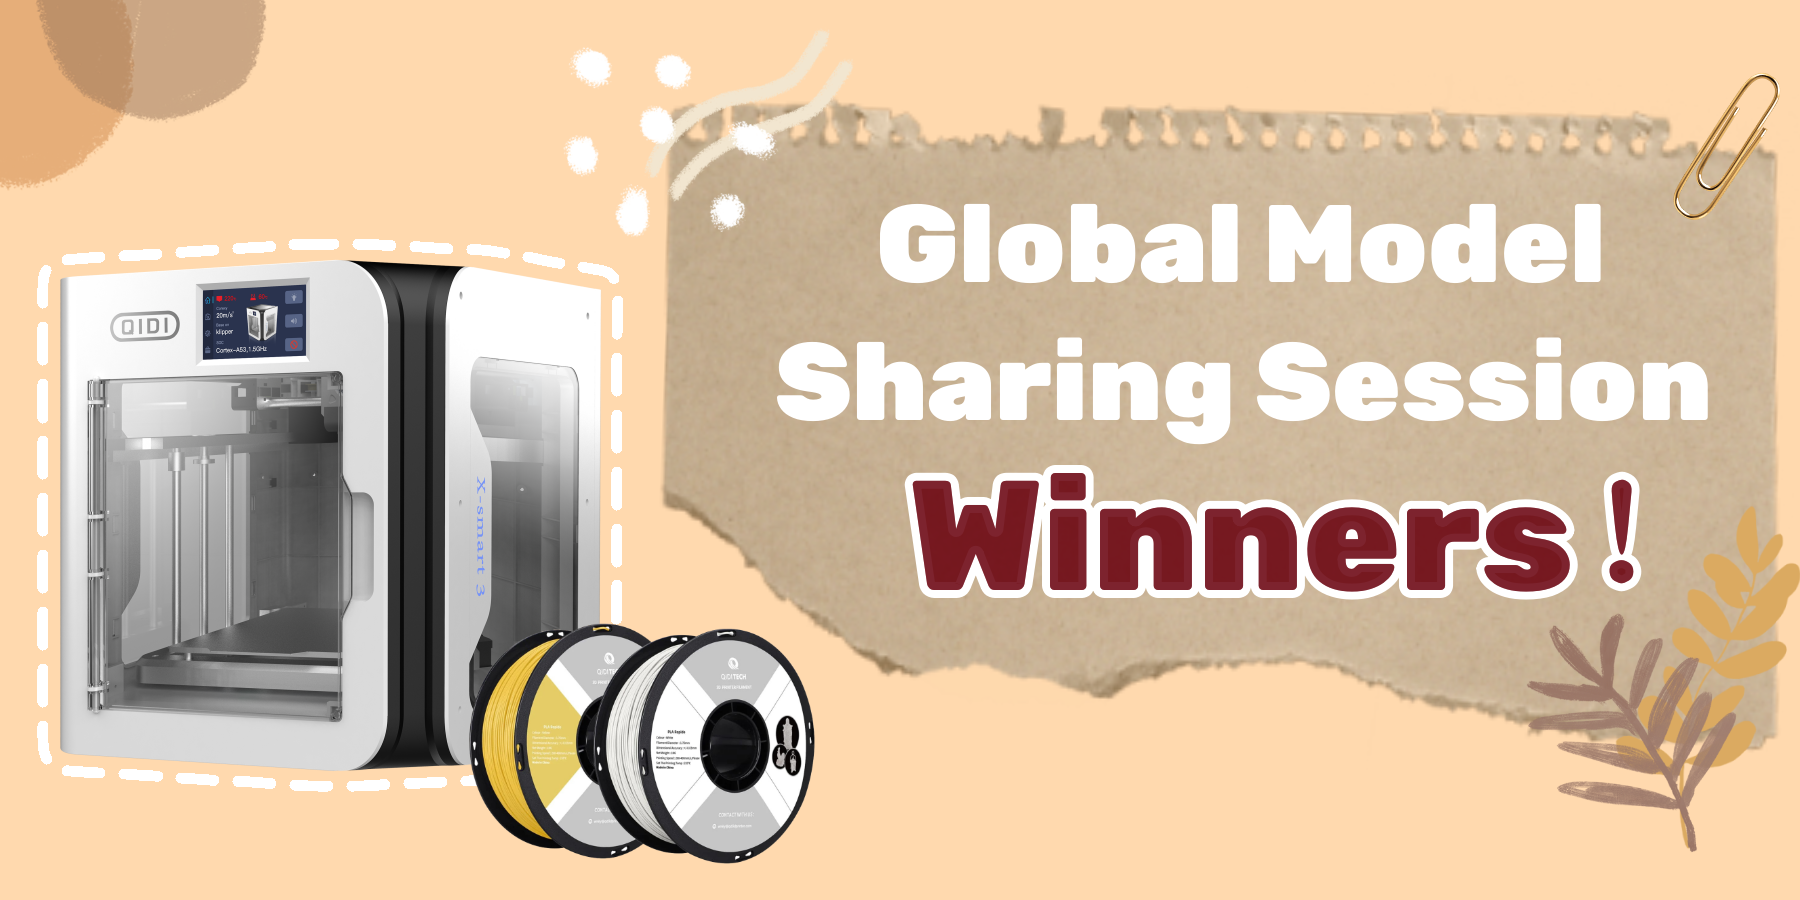 Global Model Sharing Session Results Announced